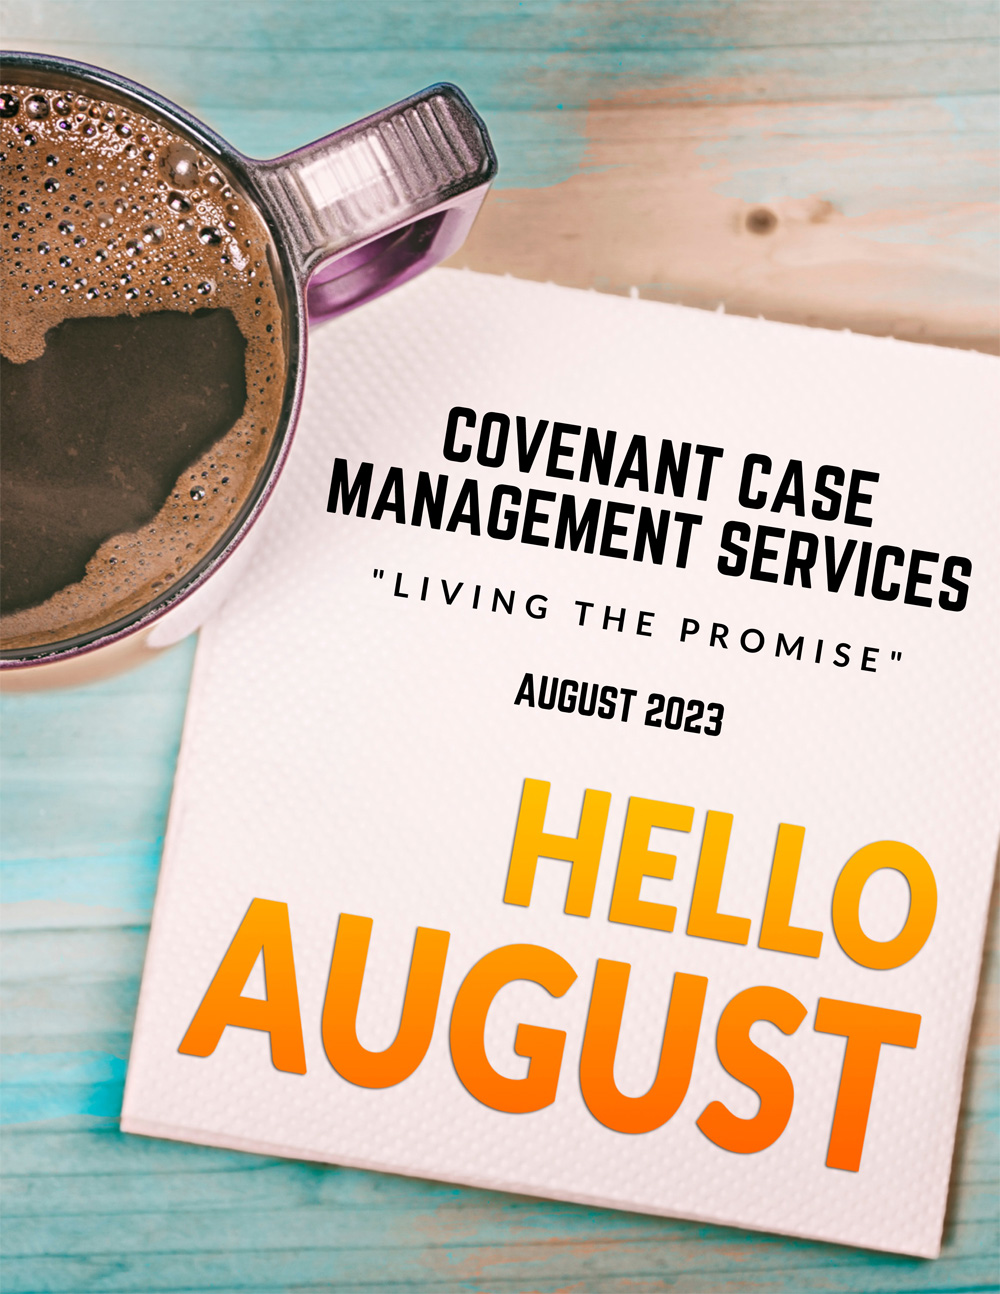 August 2023 Newsletter from Covenant Case Management Services